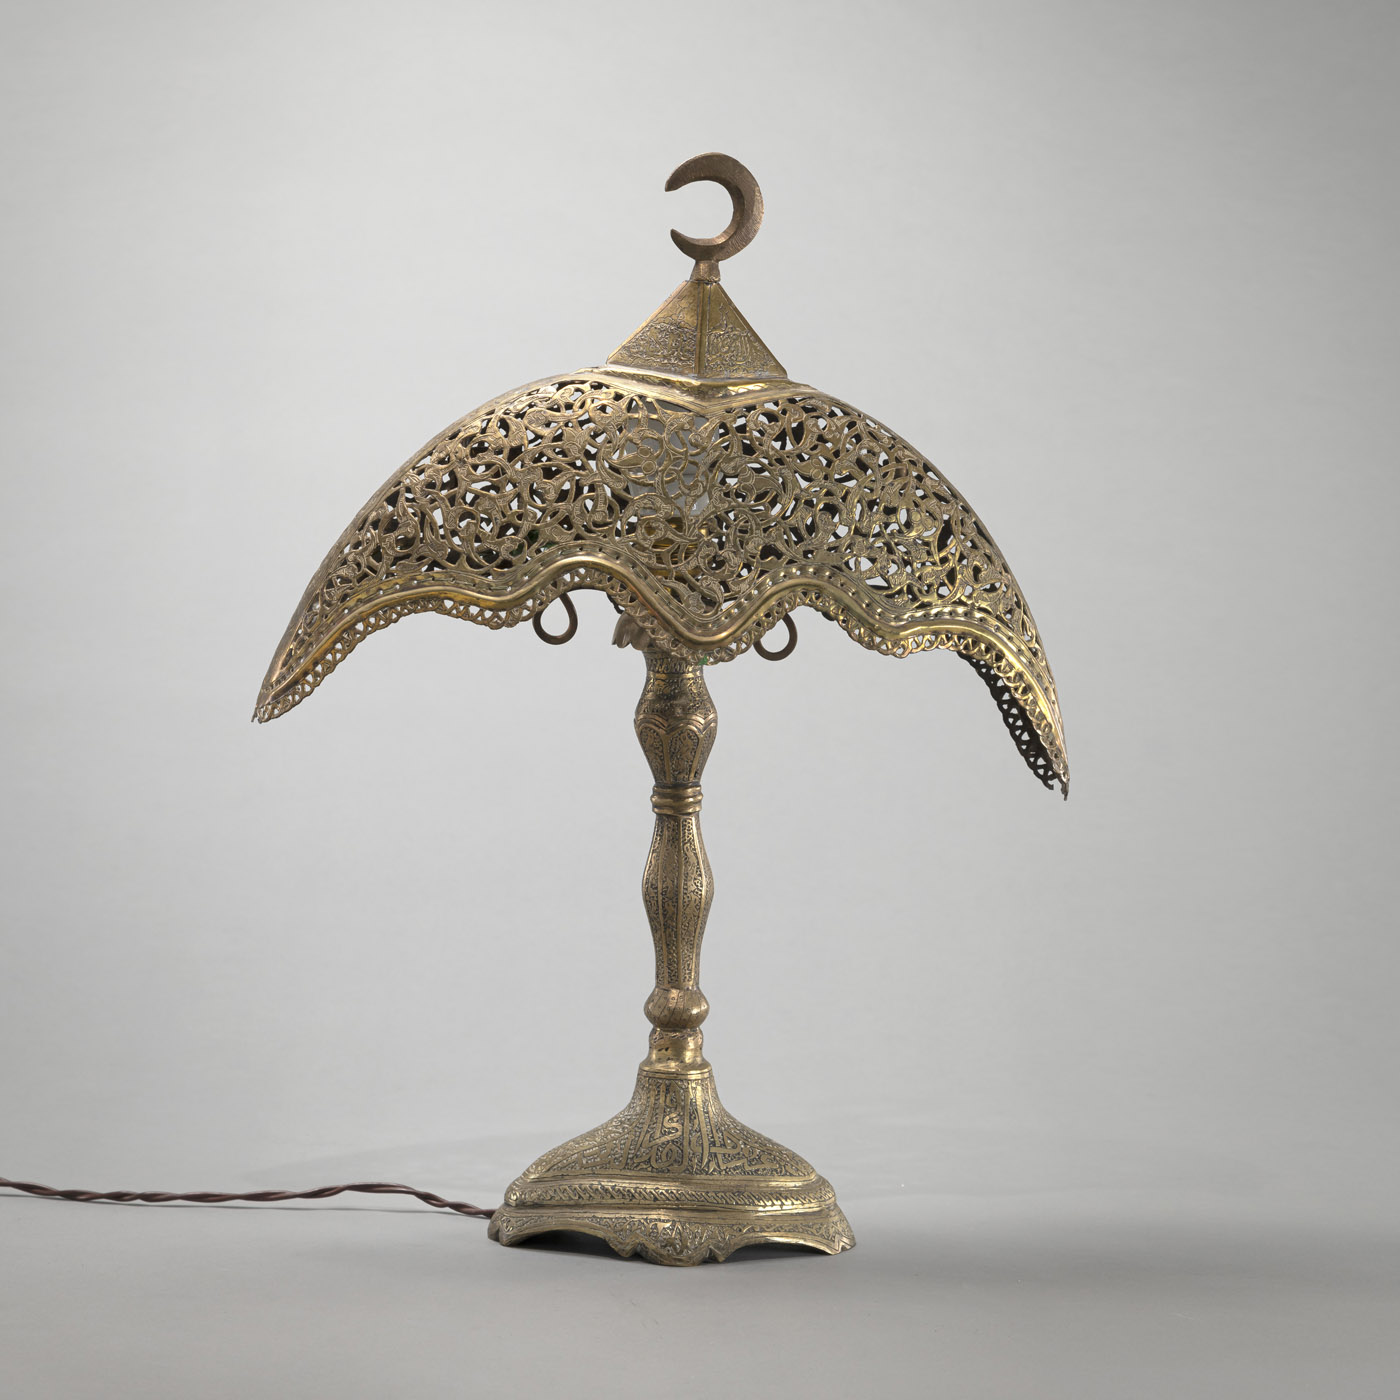 <b>A DECORATED BRASS TABLE LAMP</b>